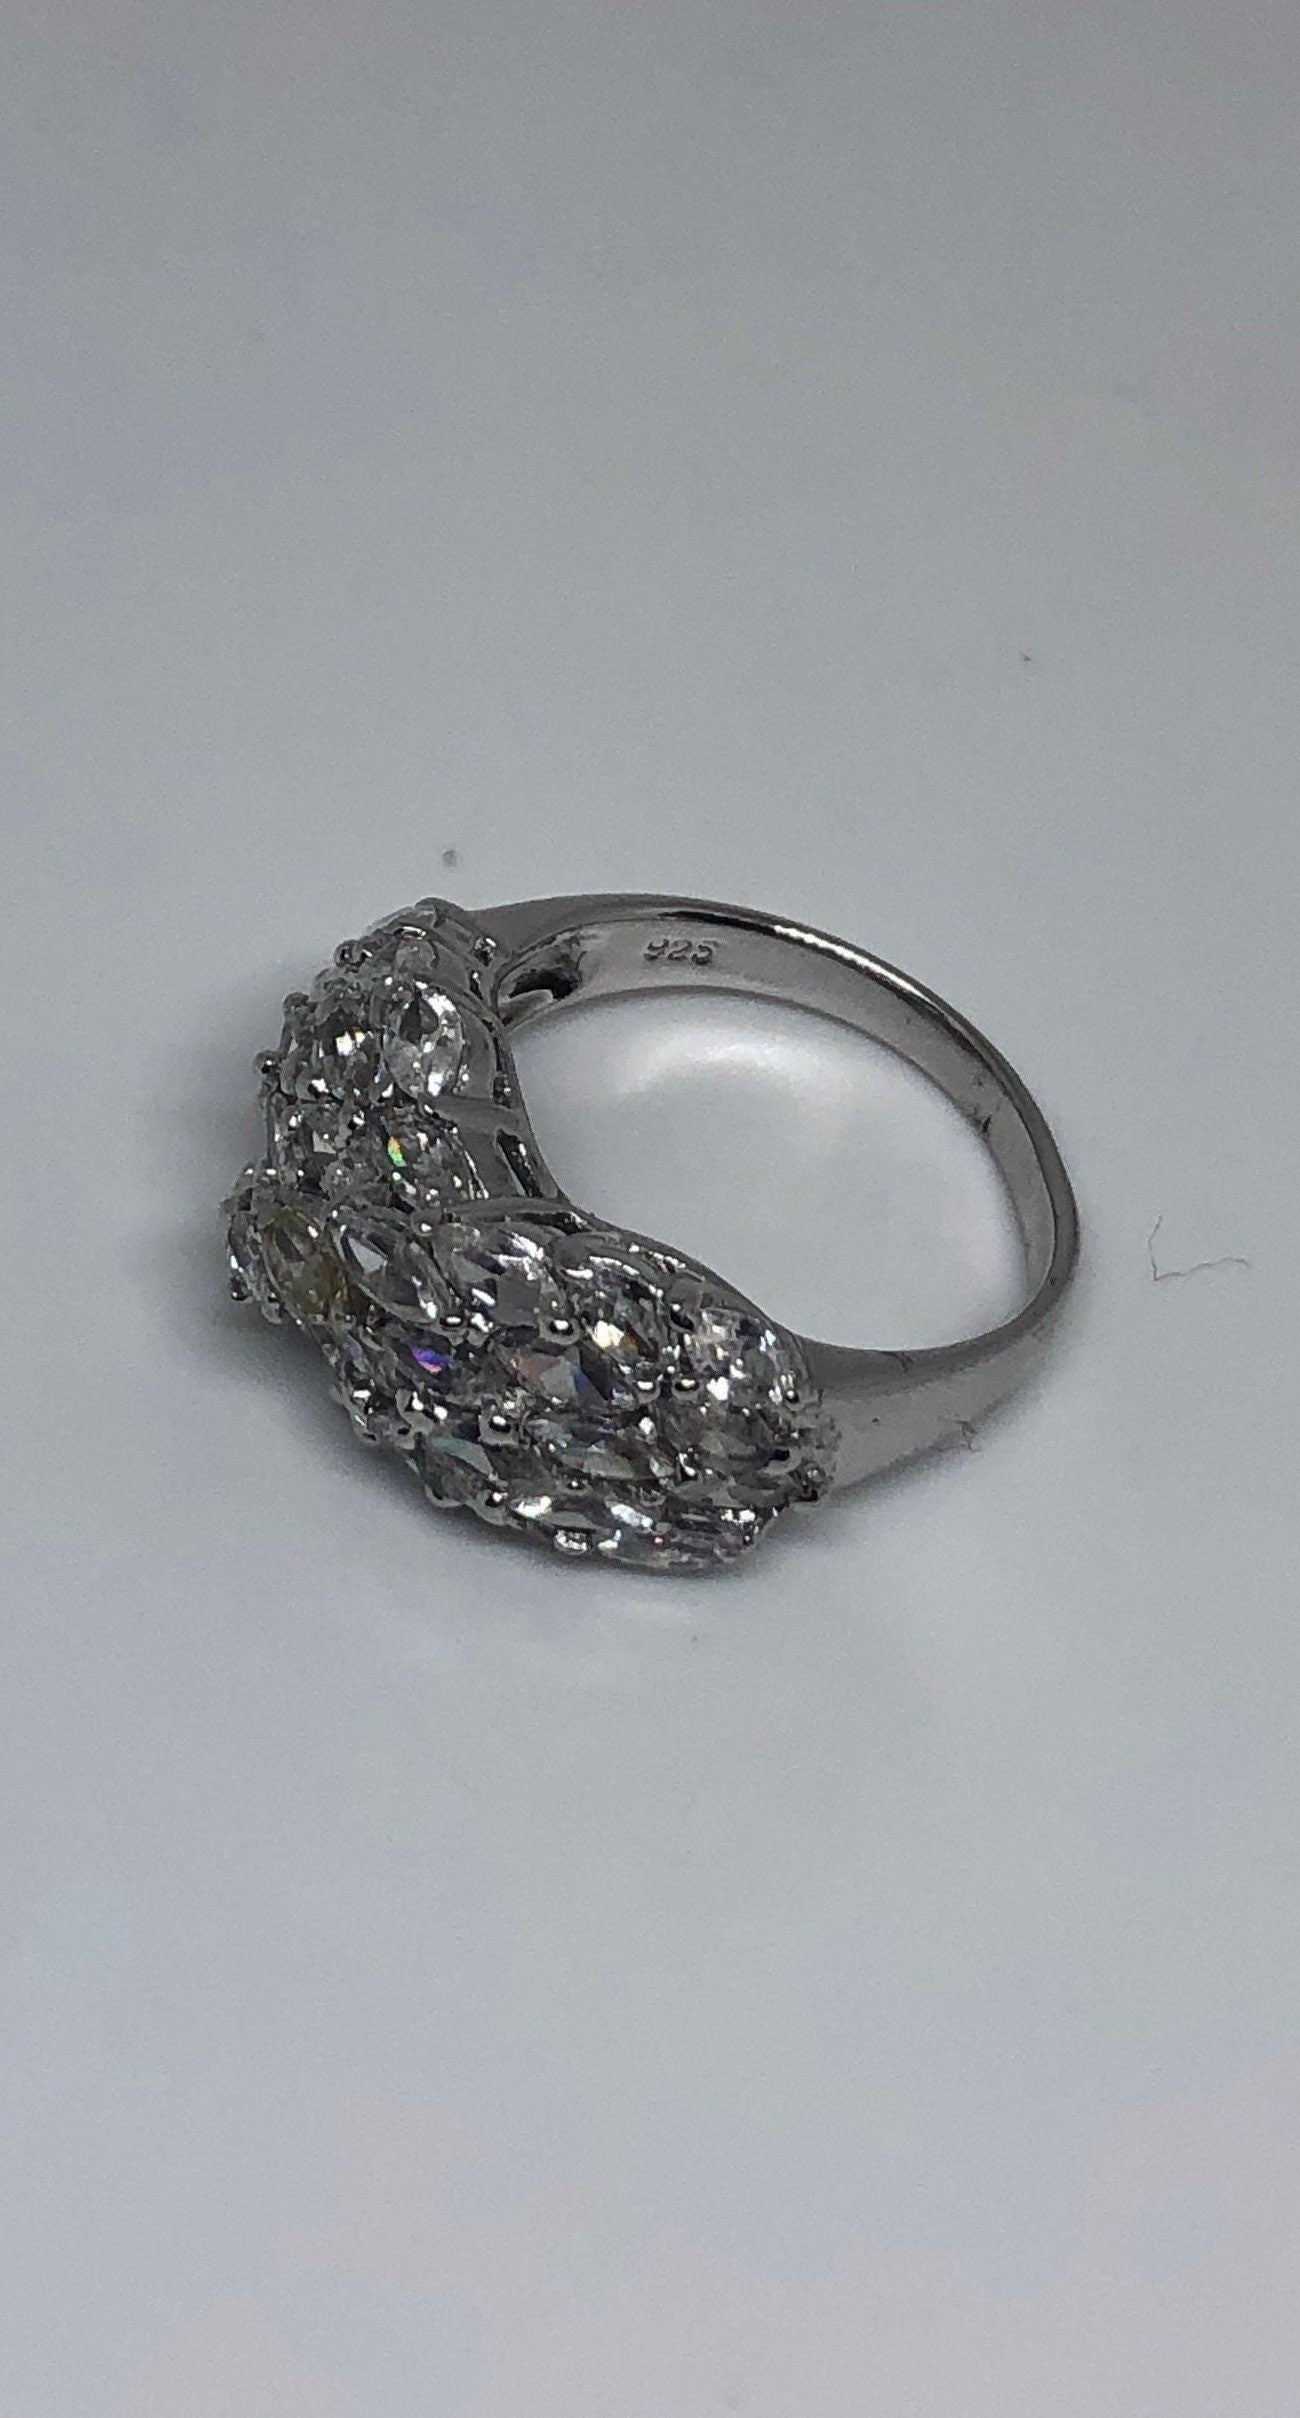 Vintage Clear White Sapphire 925 Sterling Silver Cocktail Ring Size 6